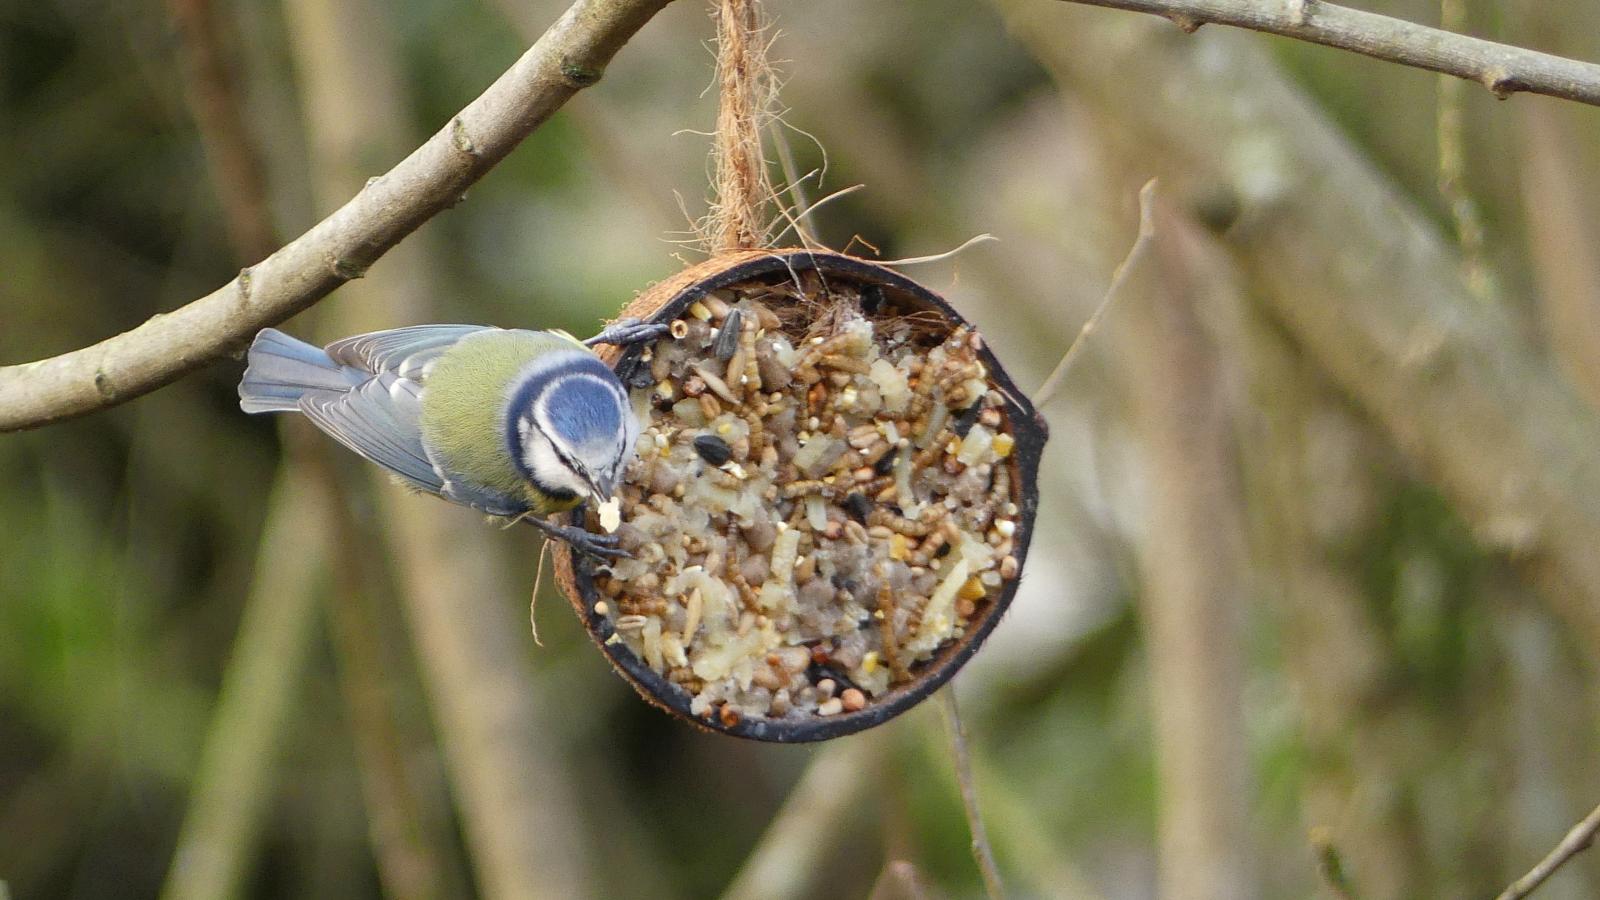 A blue-tit eating from a home-made coconut bird feeder